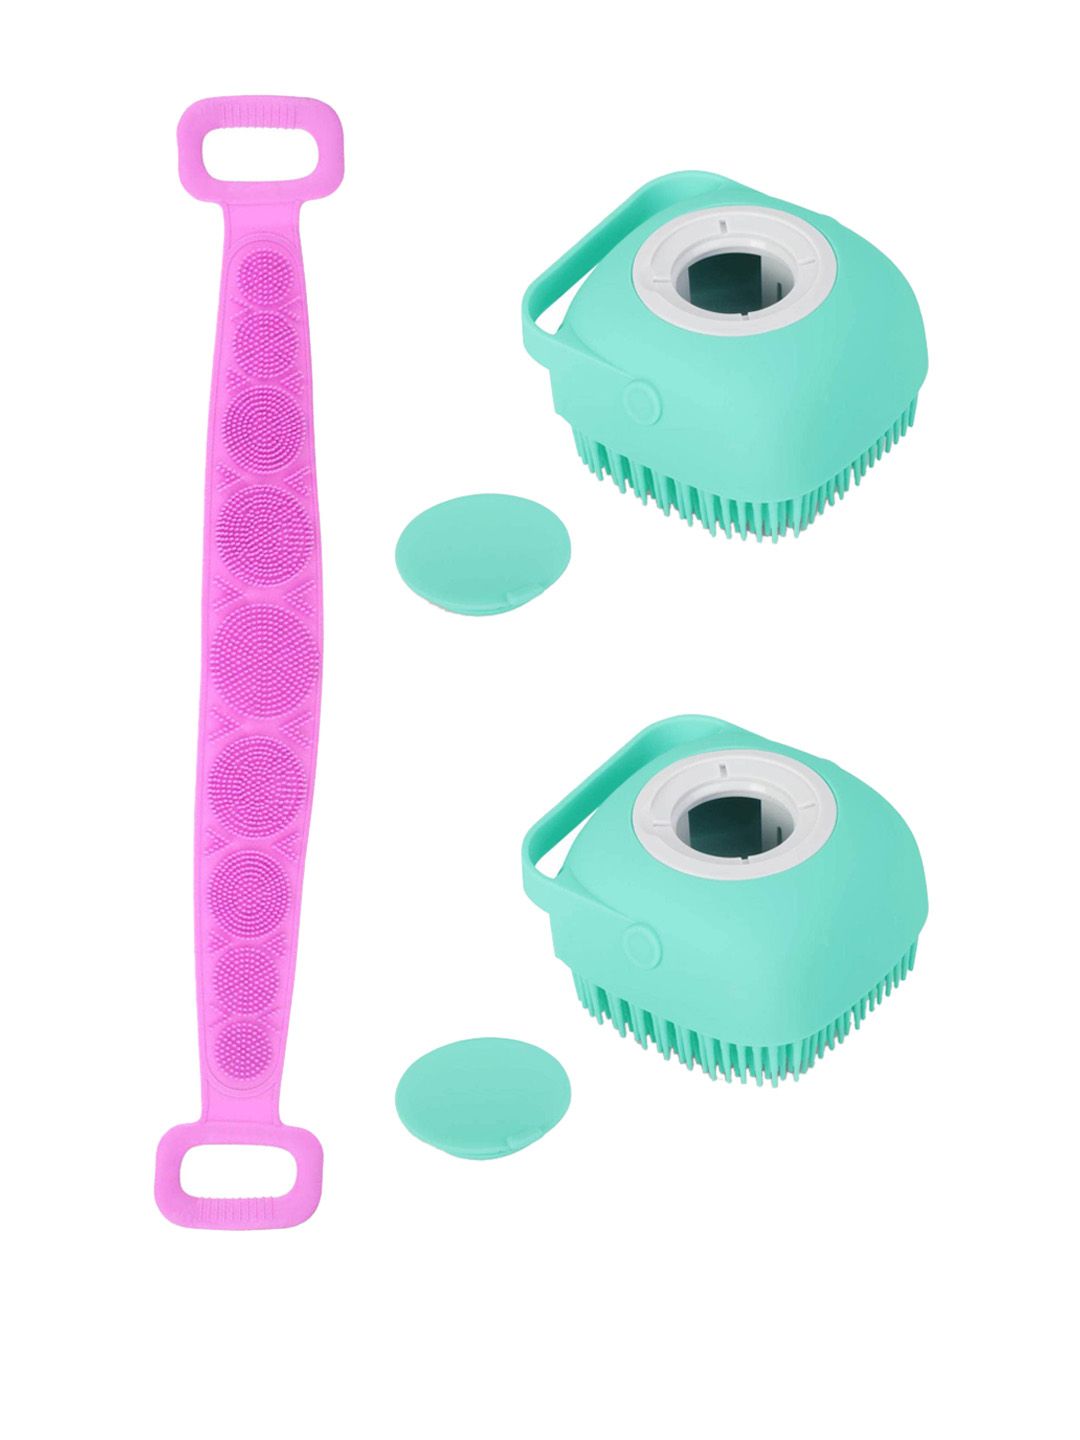 MAJESTIQUE Pink & Teal Silicone Bathroom Accessories Set Price in India